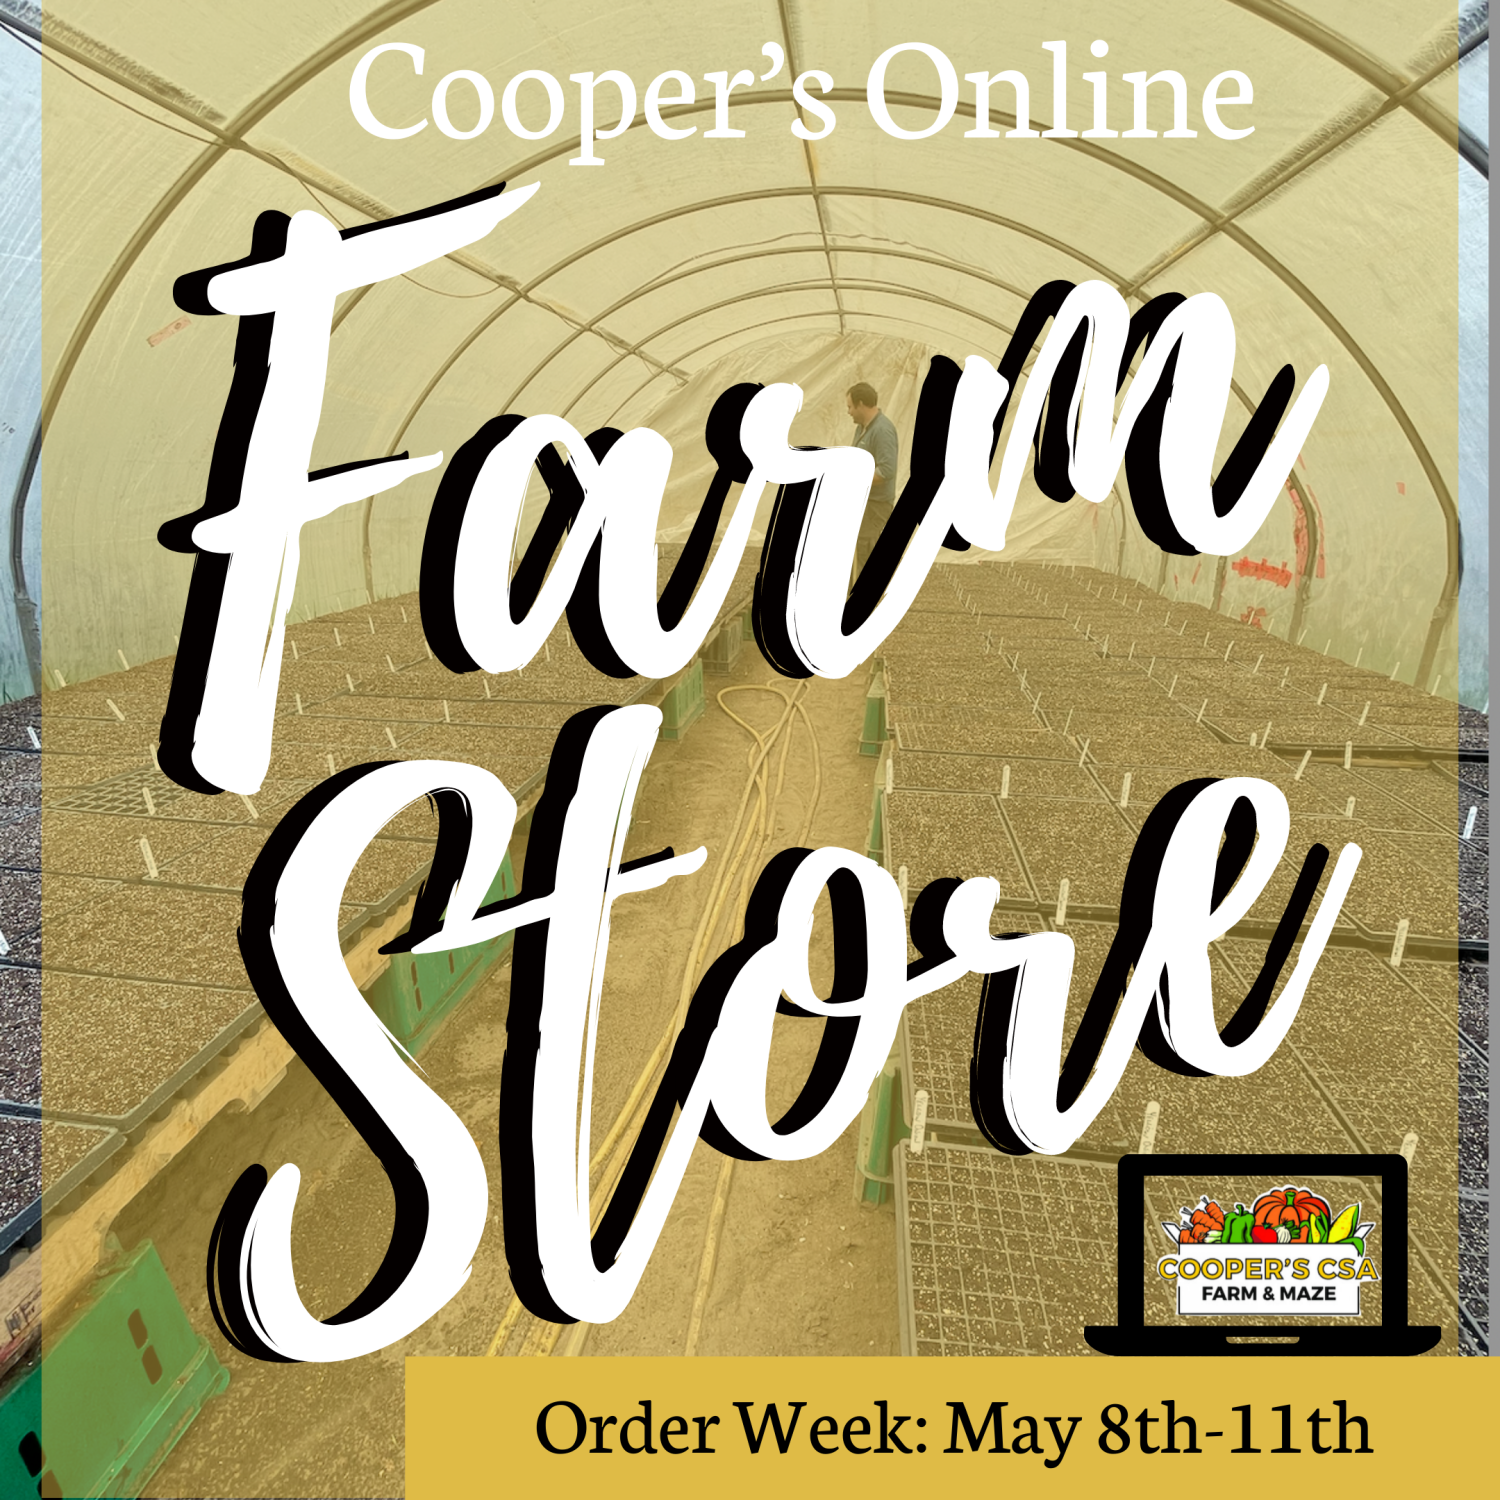 Coopers CSA Online FarmStore- Order week May 8th-11th